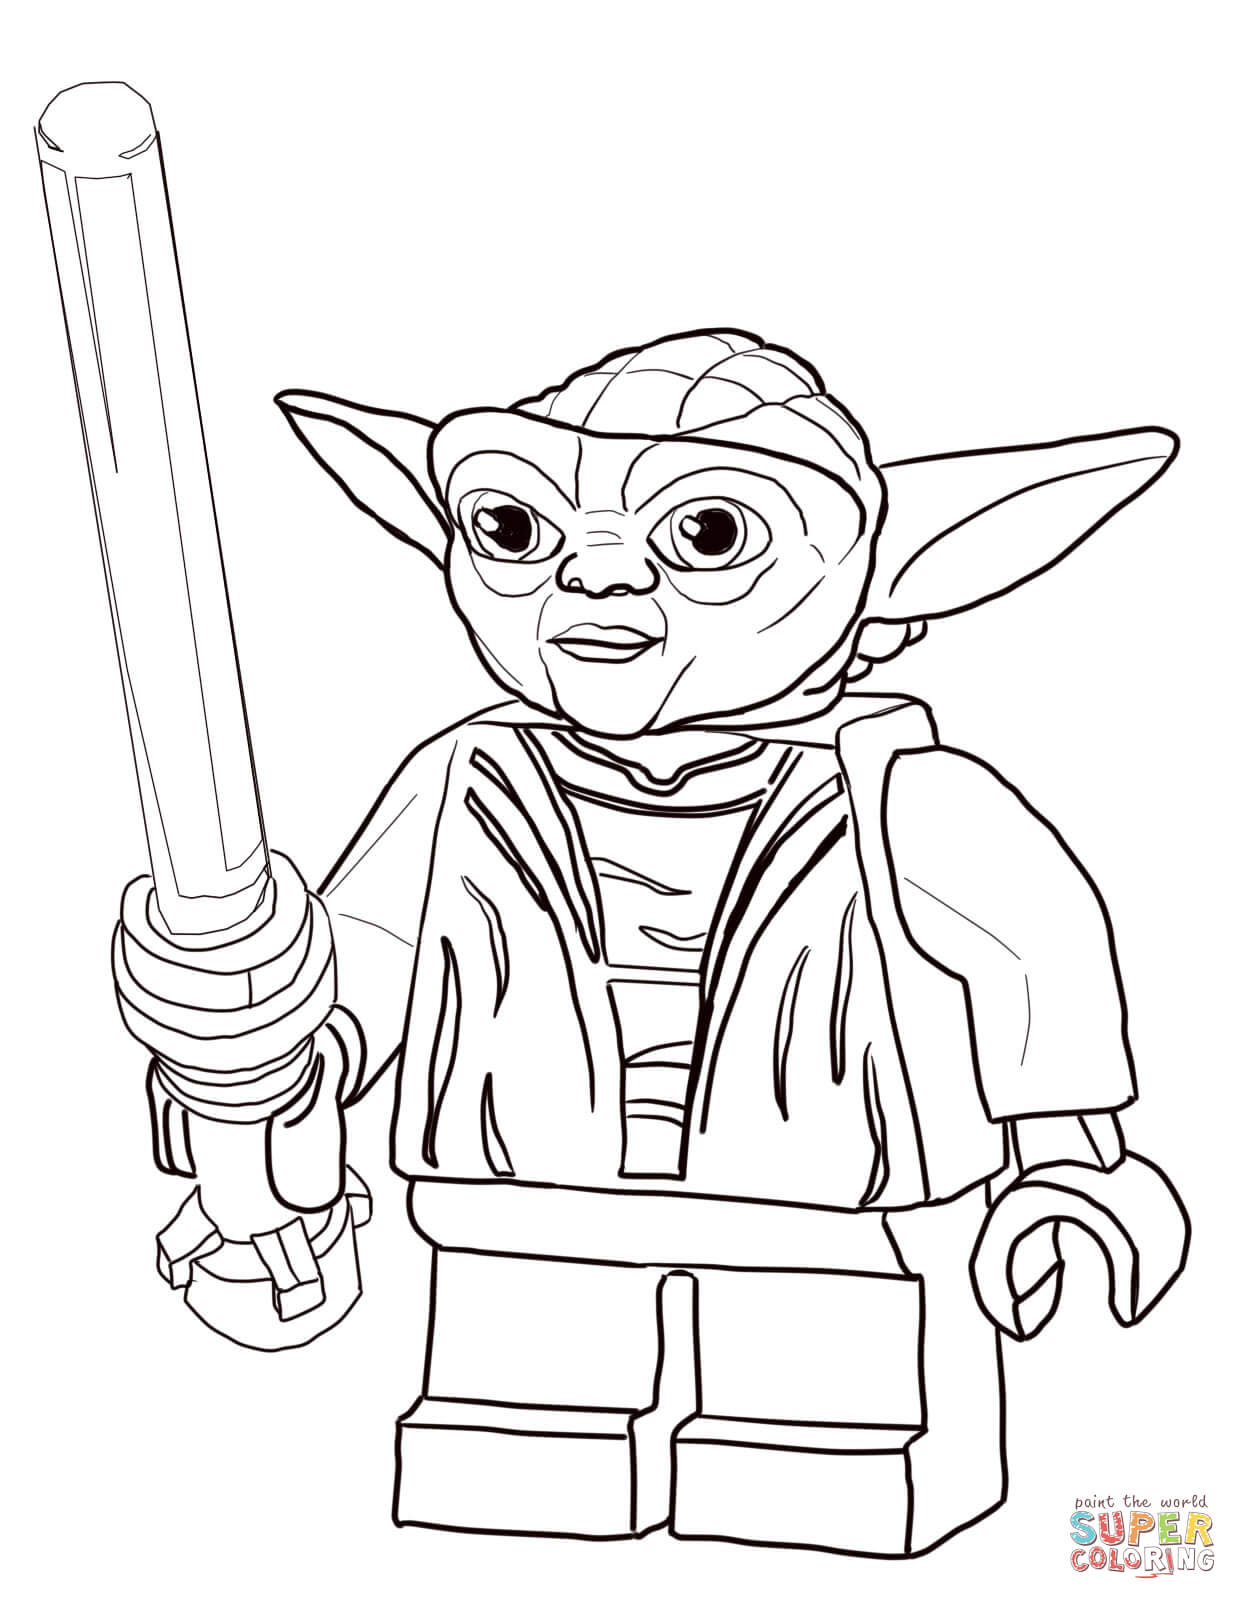 Lego Coloring Pages Star Wars Lego Star Wars Master Yoda Coloring Page Free Printable Coloring Pages